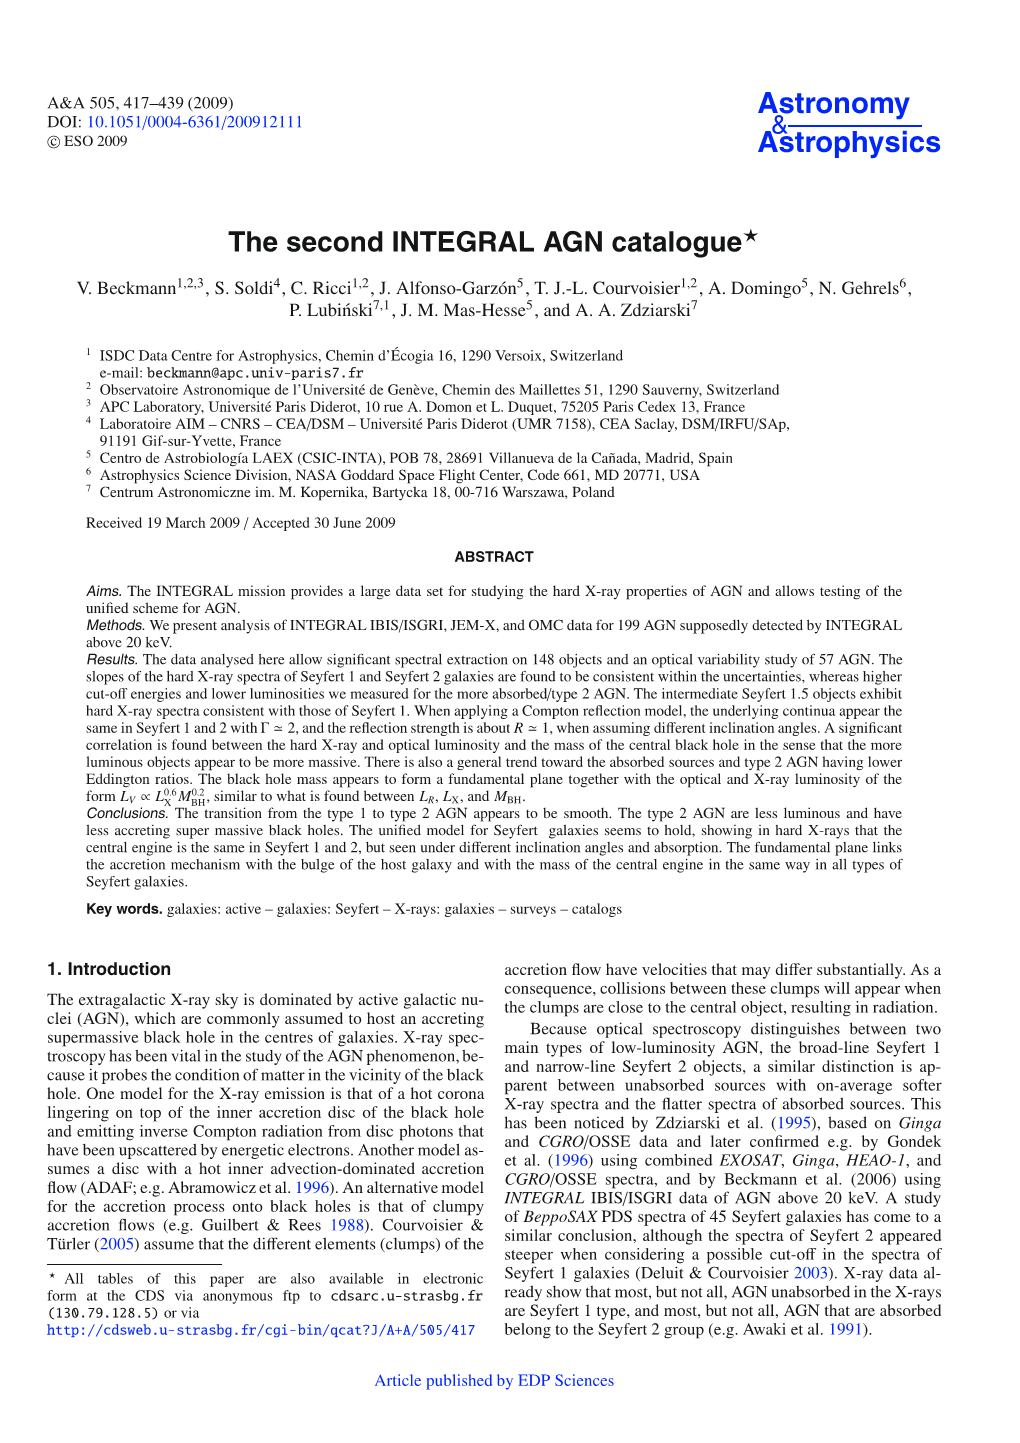 The Second INTEGRAL AGN Catalogue